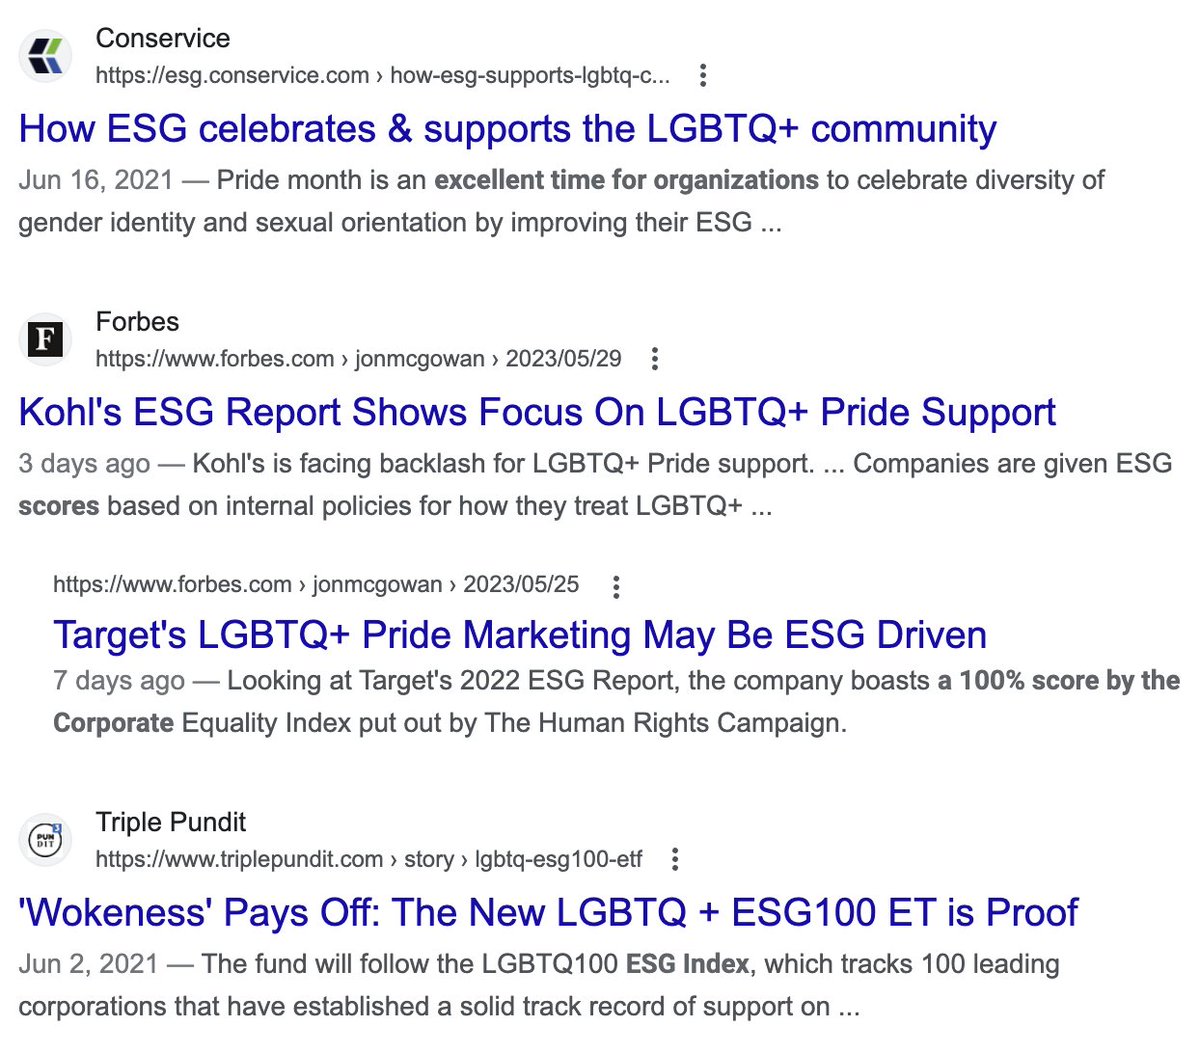 Corporations celebrating Pride Month has less to do with uplifting LGBT and more to do with uplifting ESG.